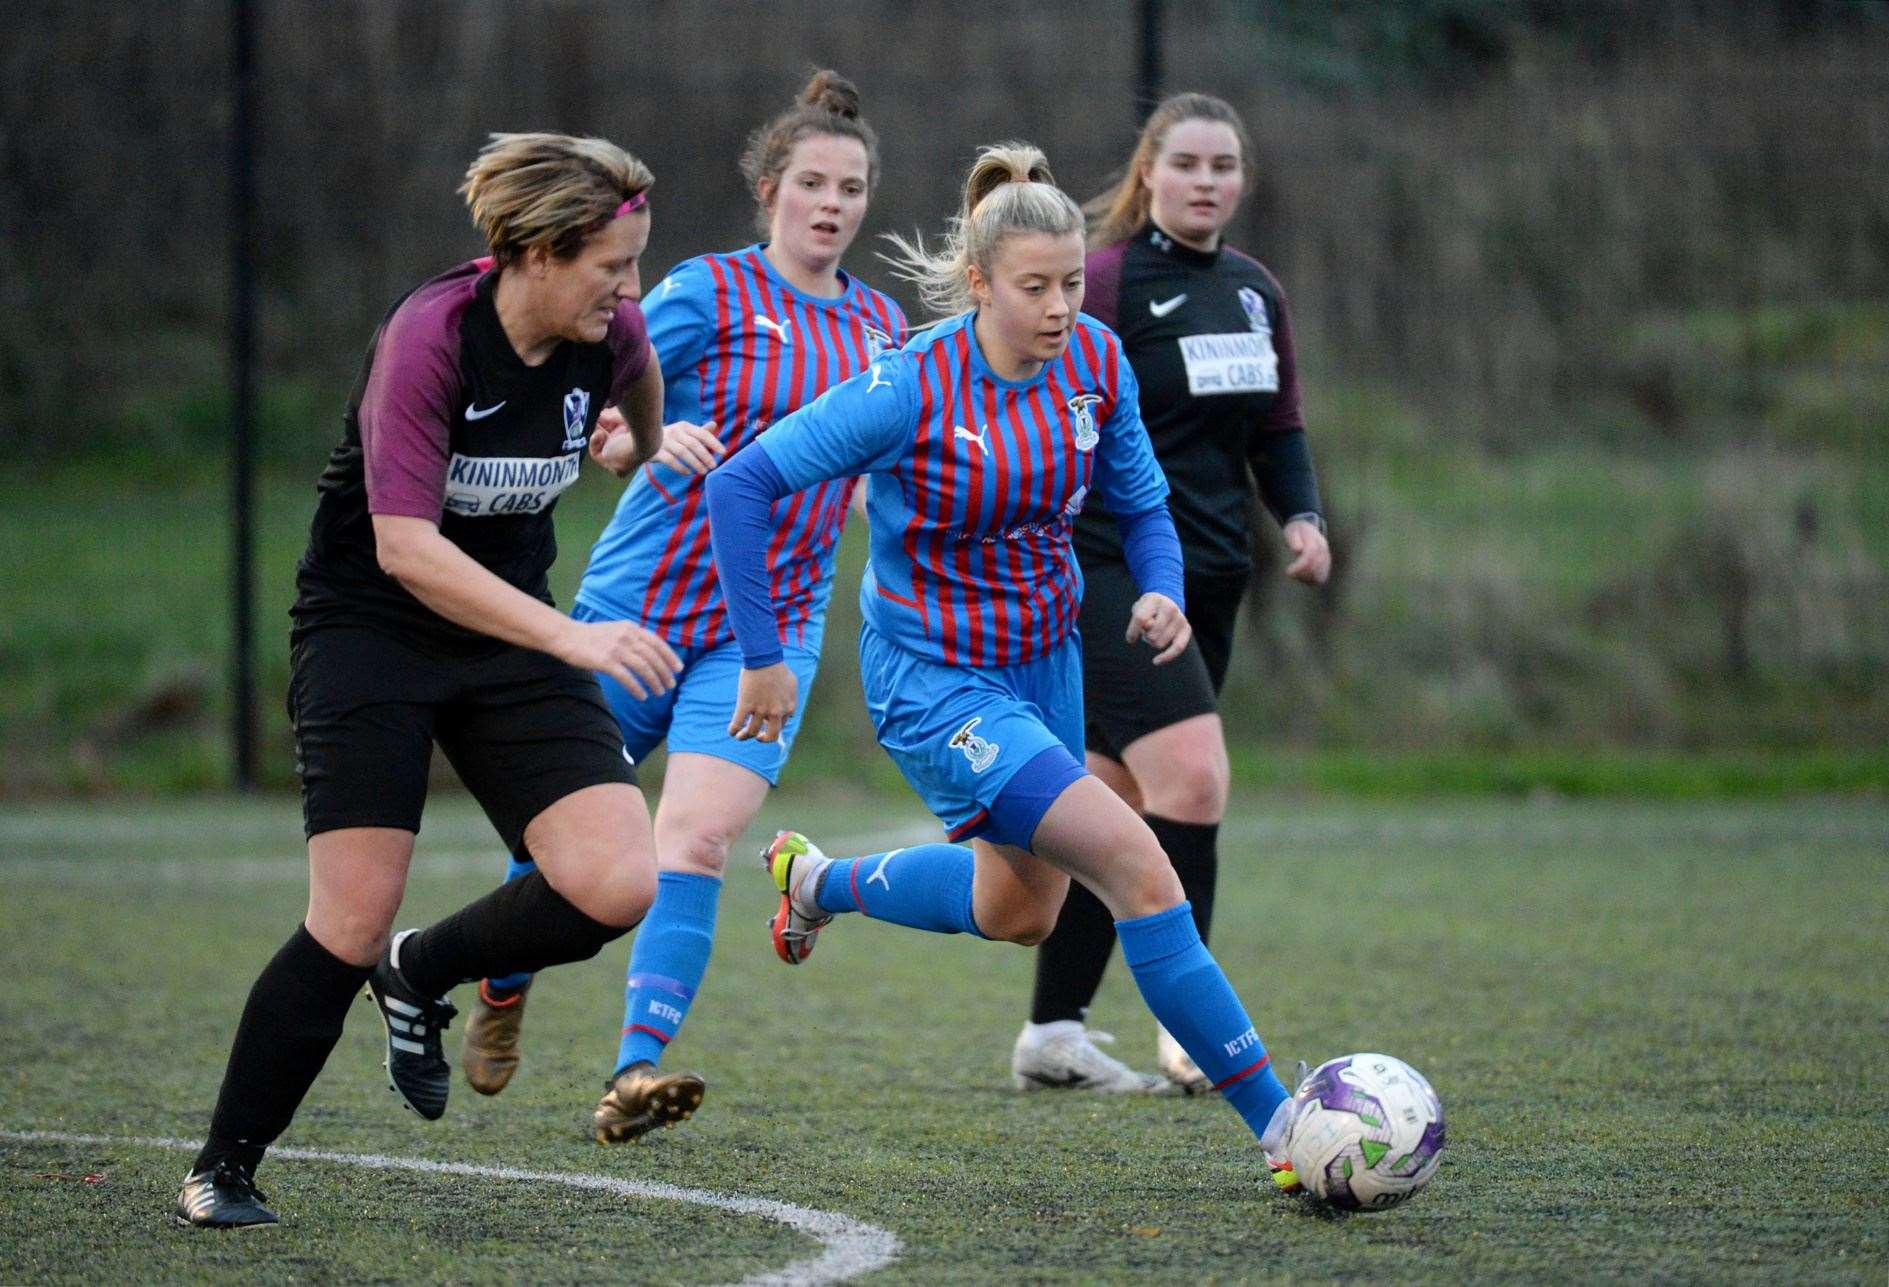 Inverness Caley Thistle Women v Buchan at Inverness Royal Academy 5 December 2021: Rhea Hossack. Picture: James Mackenzie.